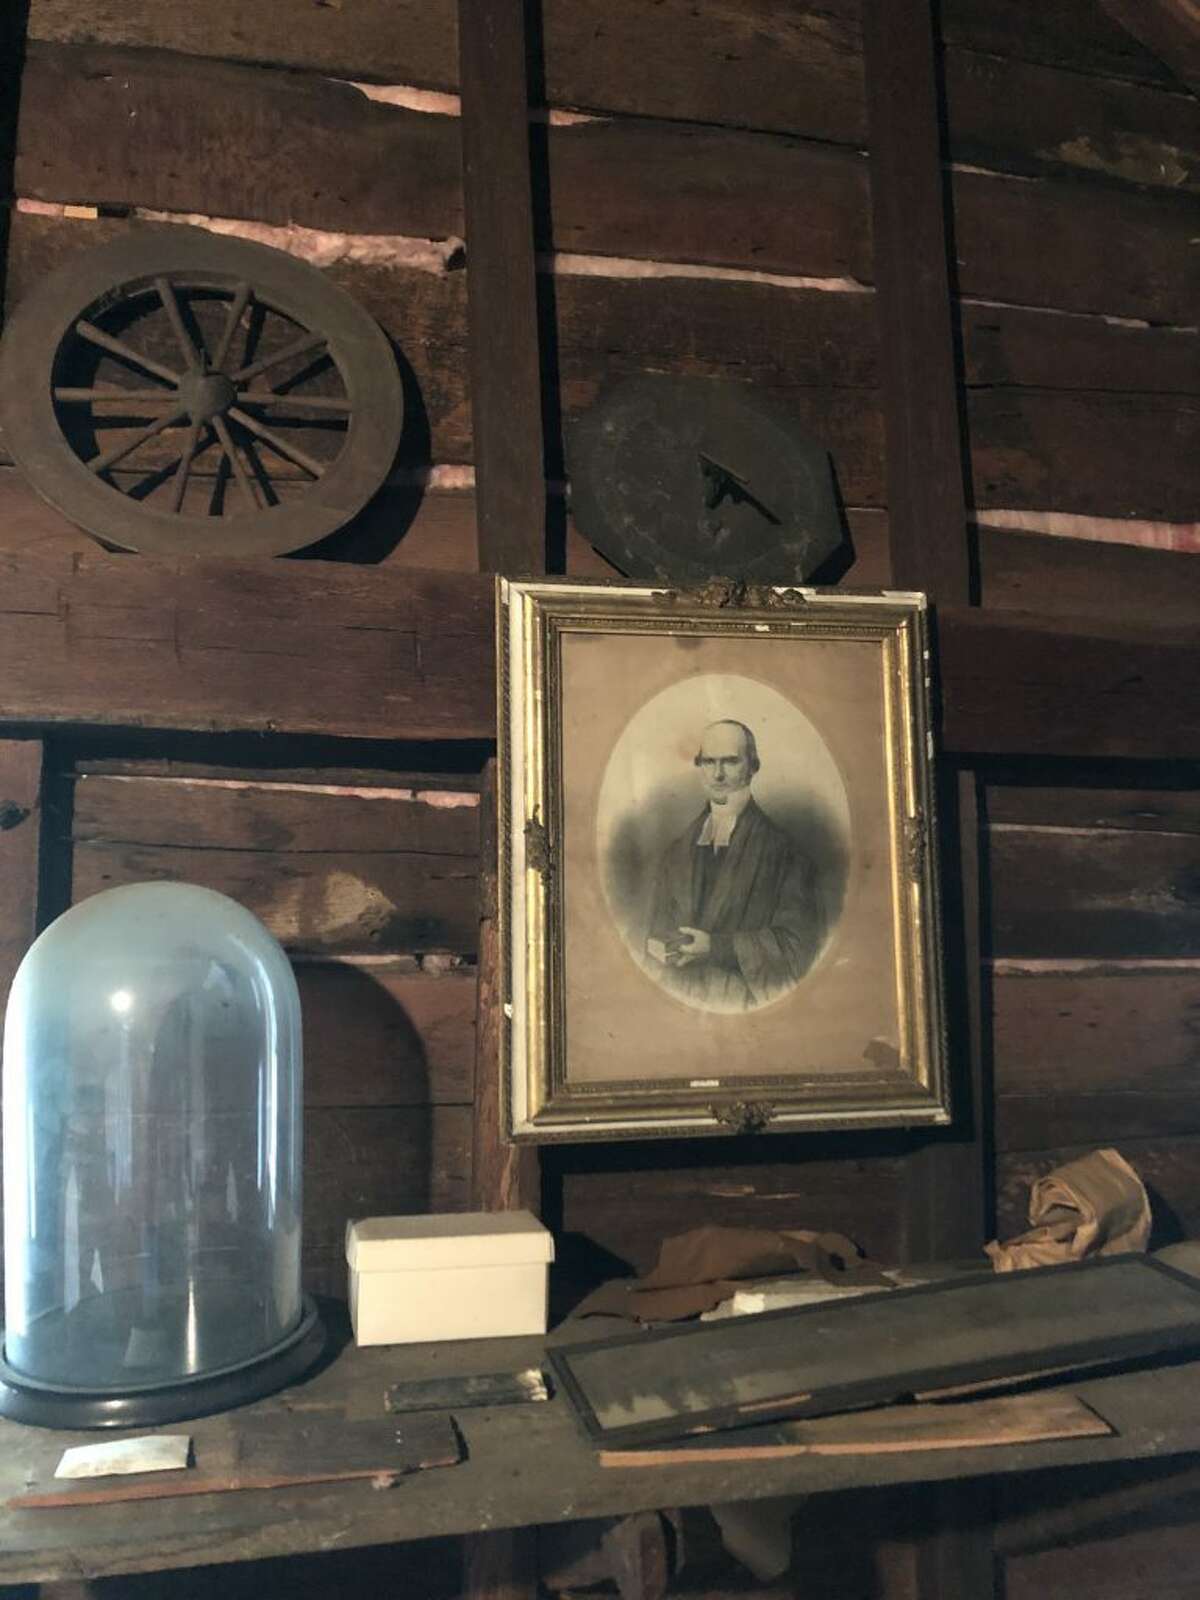 An old photograph at the Mather Homestead, and other items